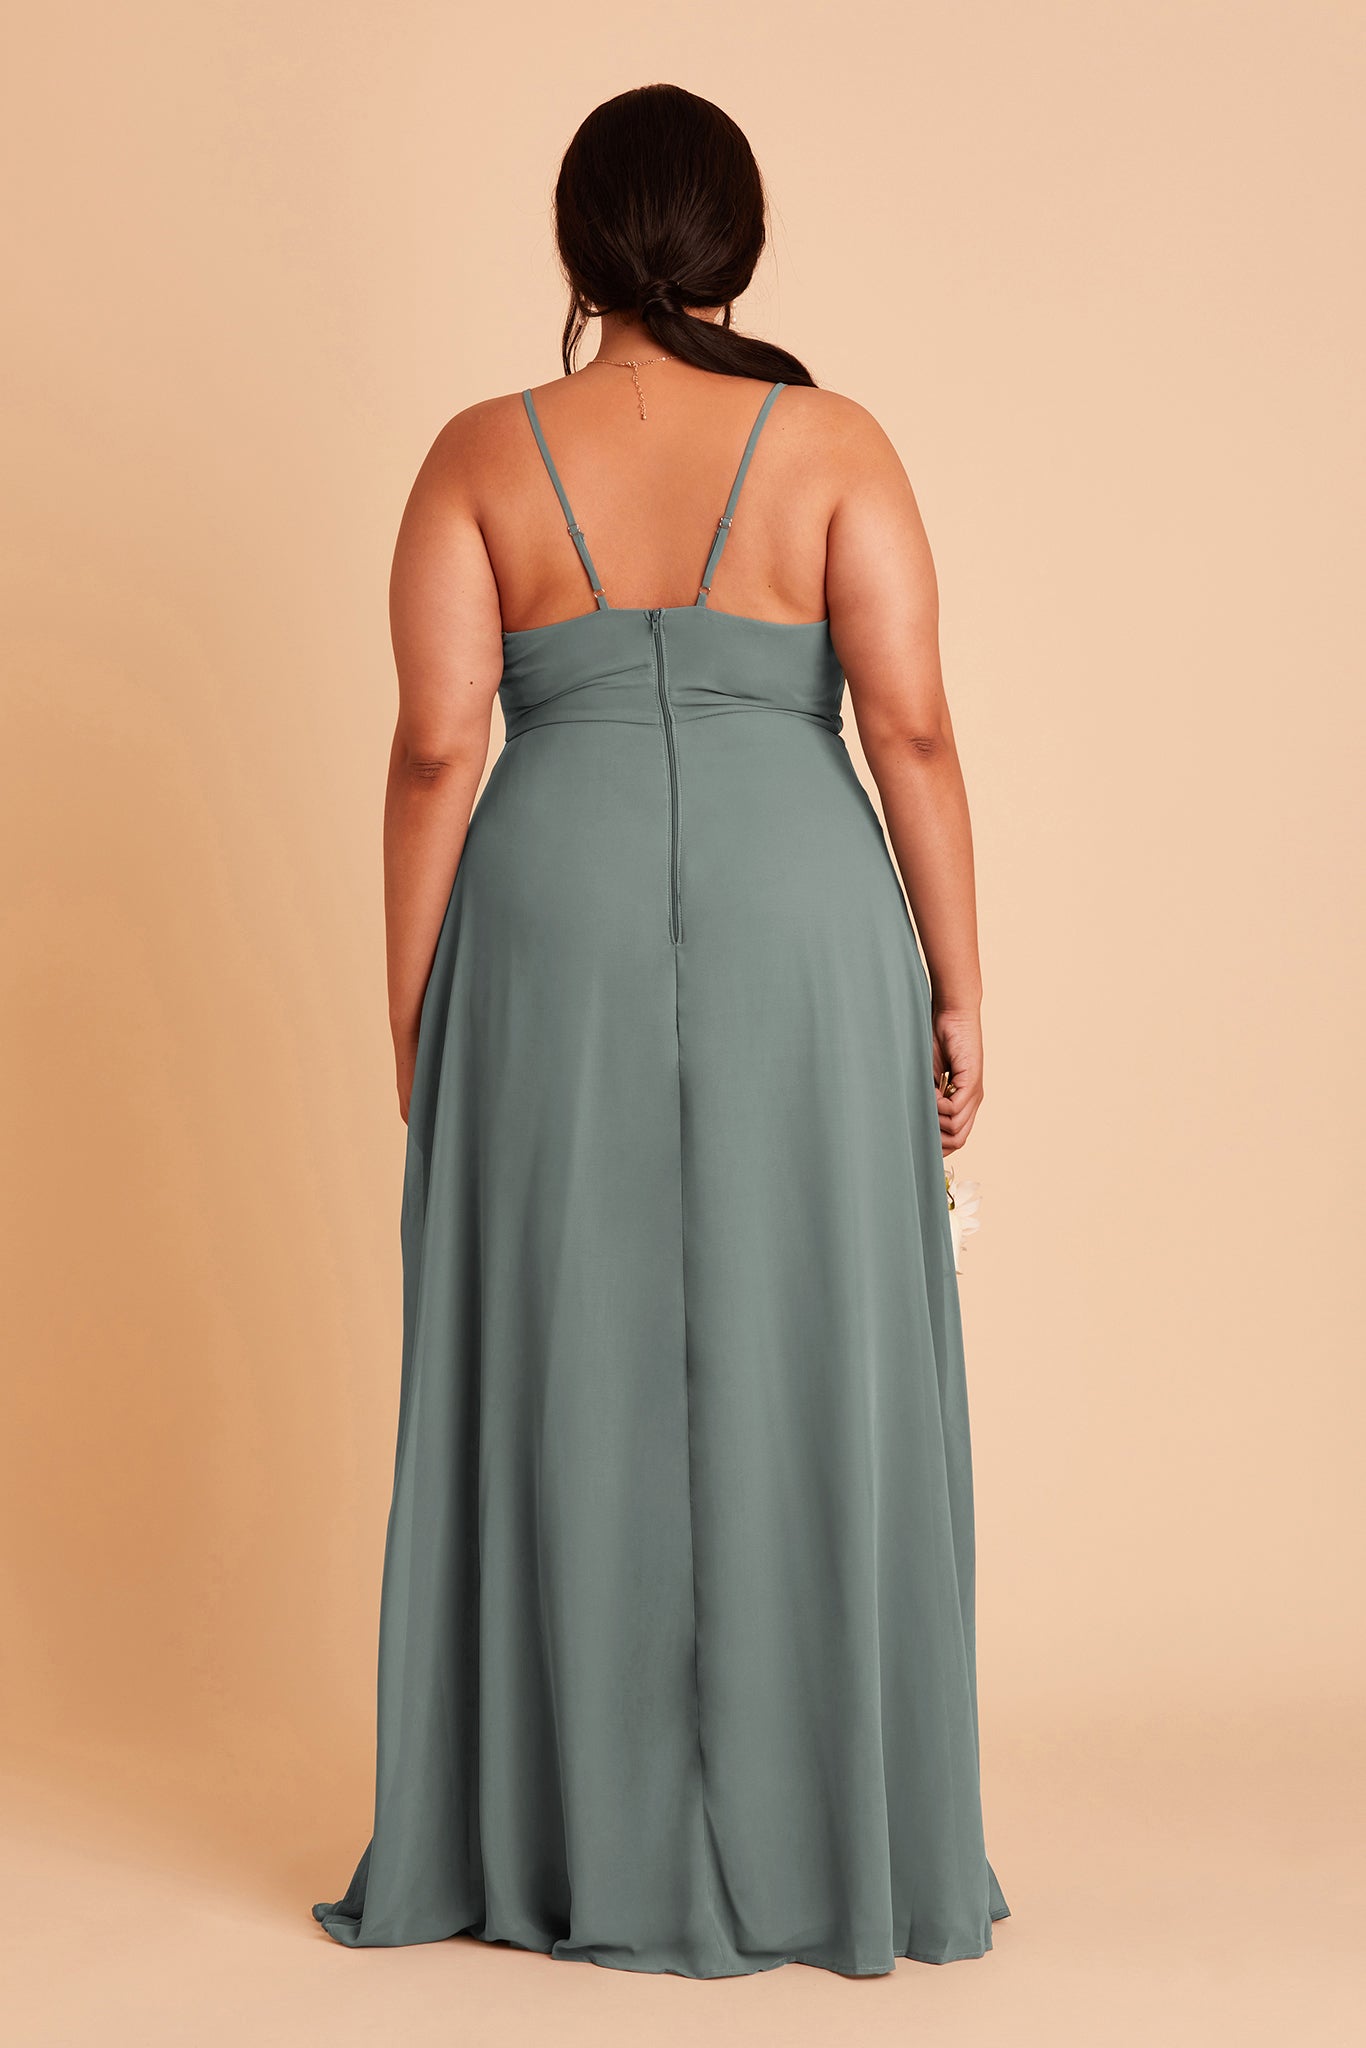 Theresa plus size bridesmaid dress with slit in sea glass chiffon by Birdy Grey, back view